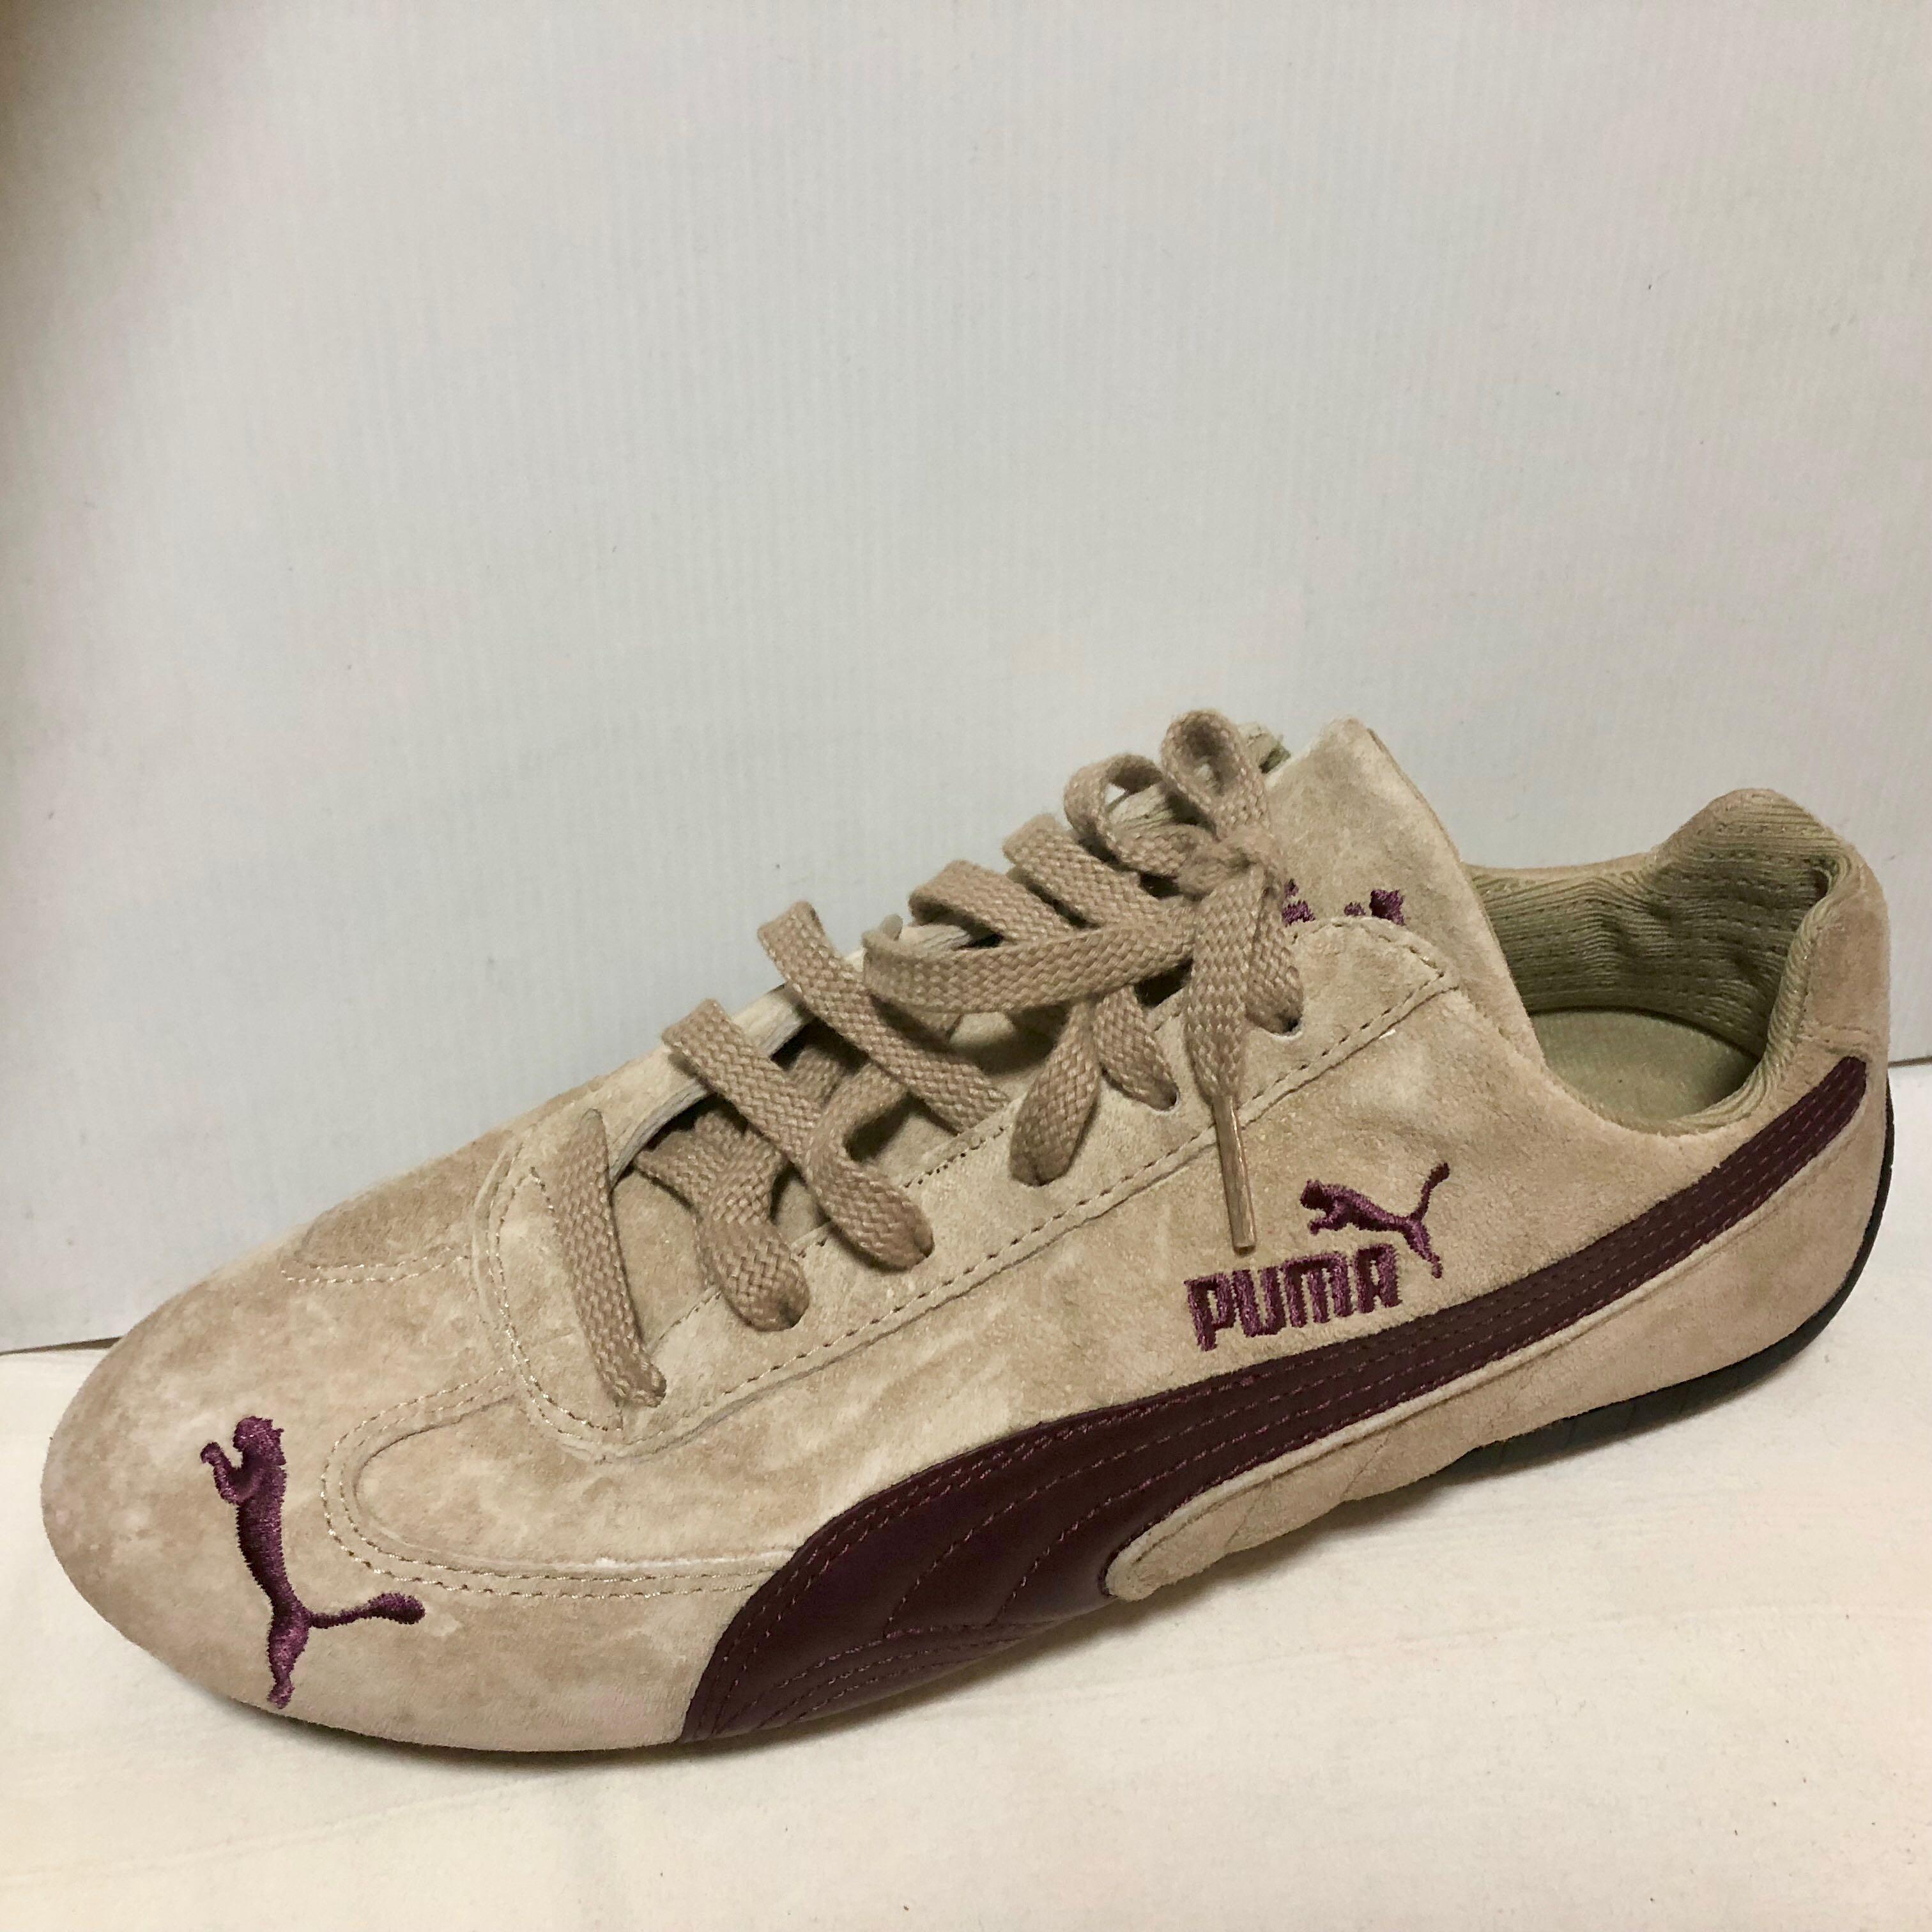 Puma Speed Cat SD Shoes - Rare Colorway 